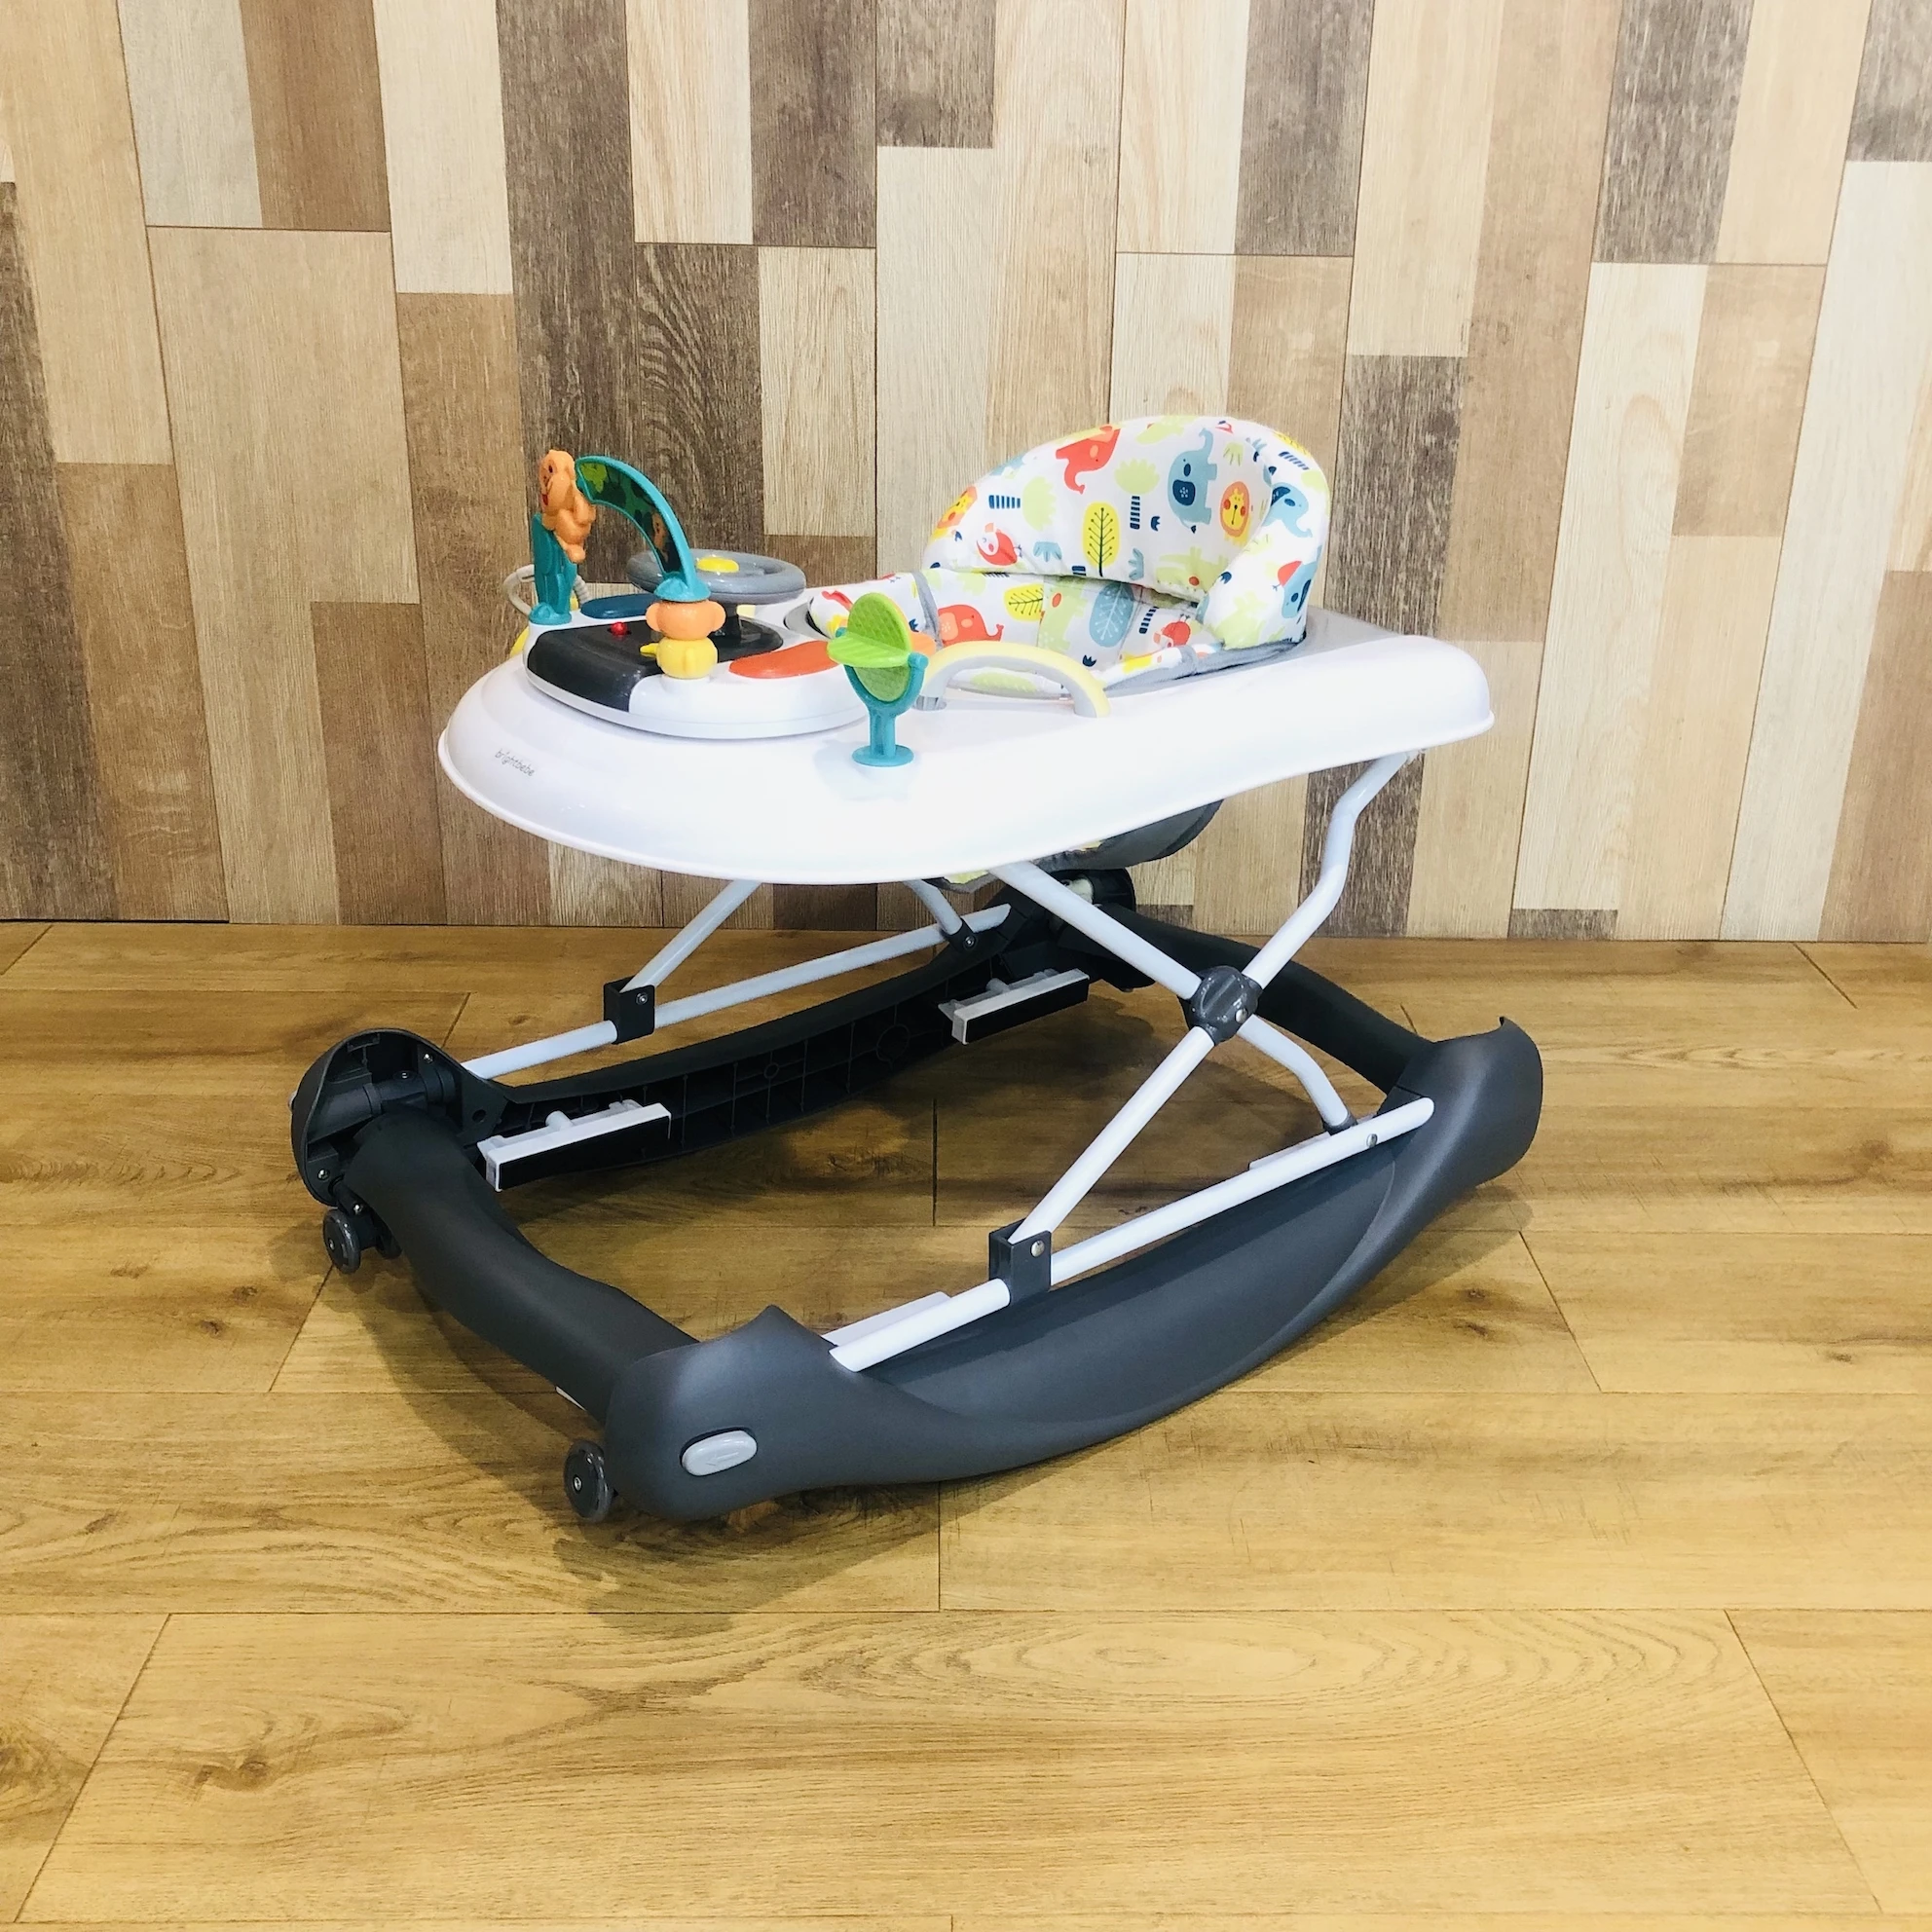 

Brightbebe 4 in 1 new model activity kids learning jumping waker baby, multifunction unique variable rocking baby walker